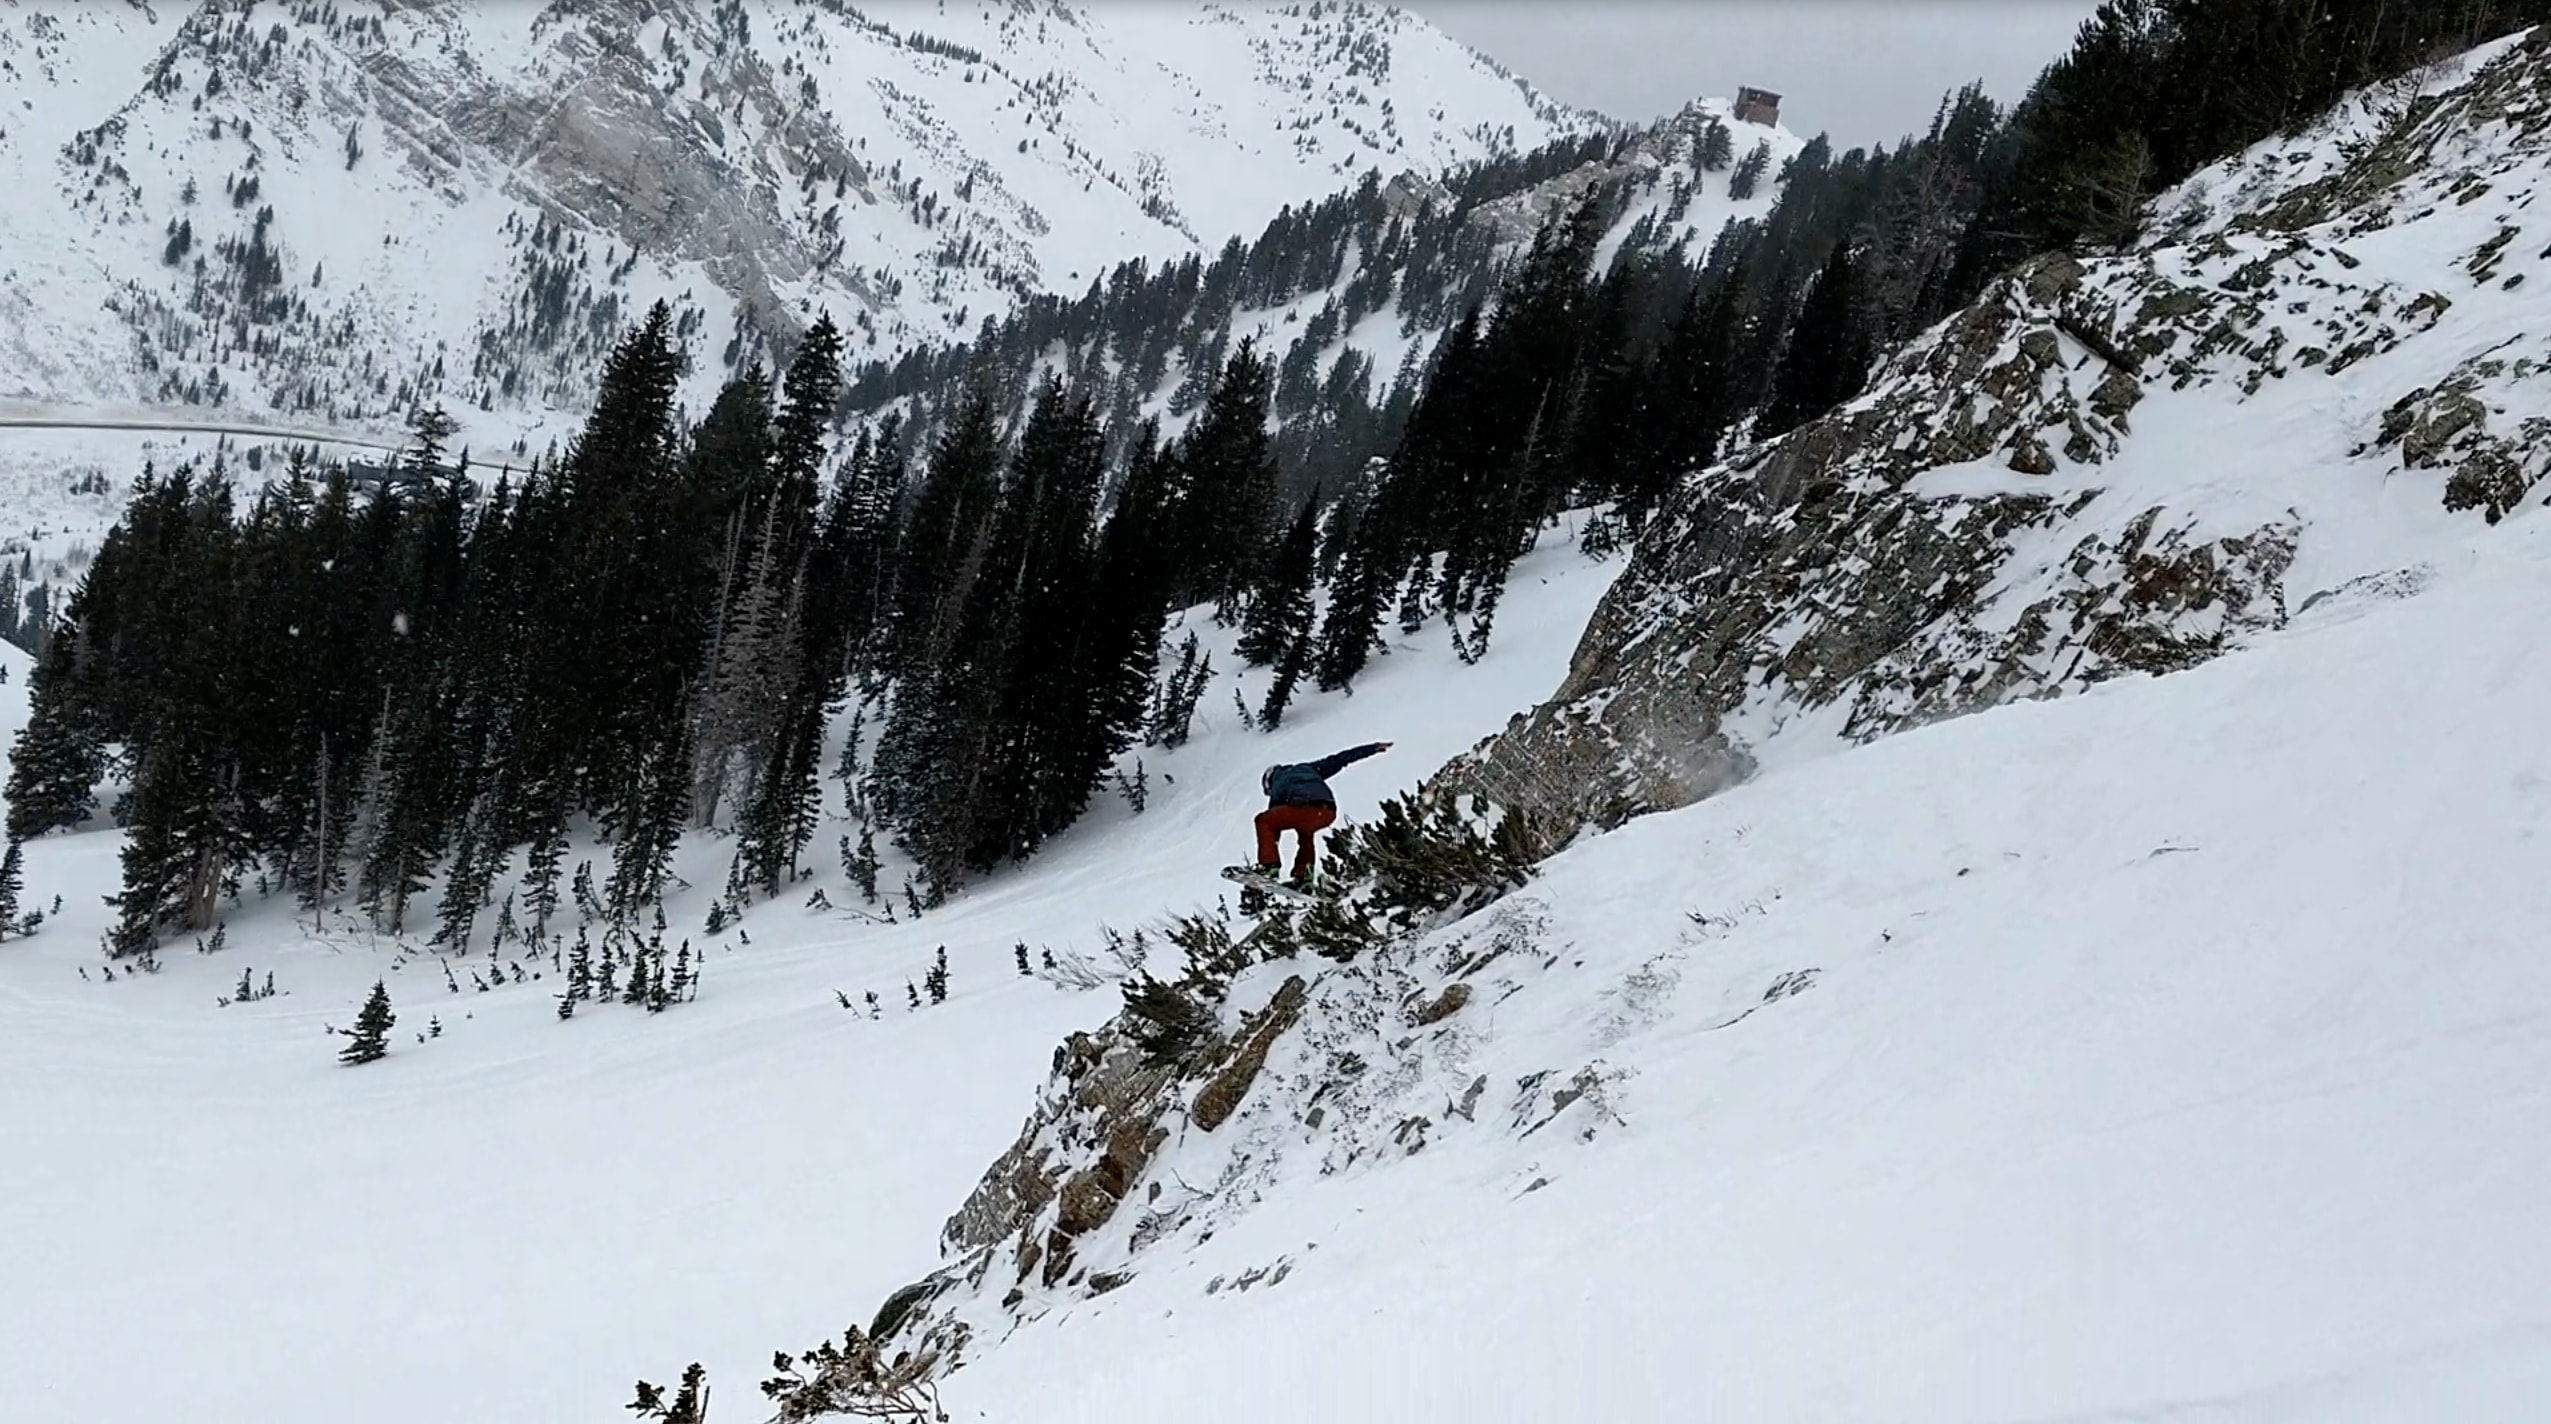 Dave Zook at the bottom of North Baldy PC:Jon Collet